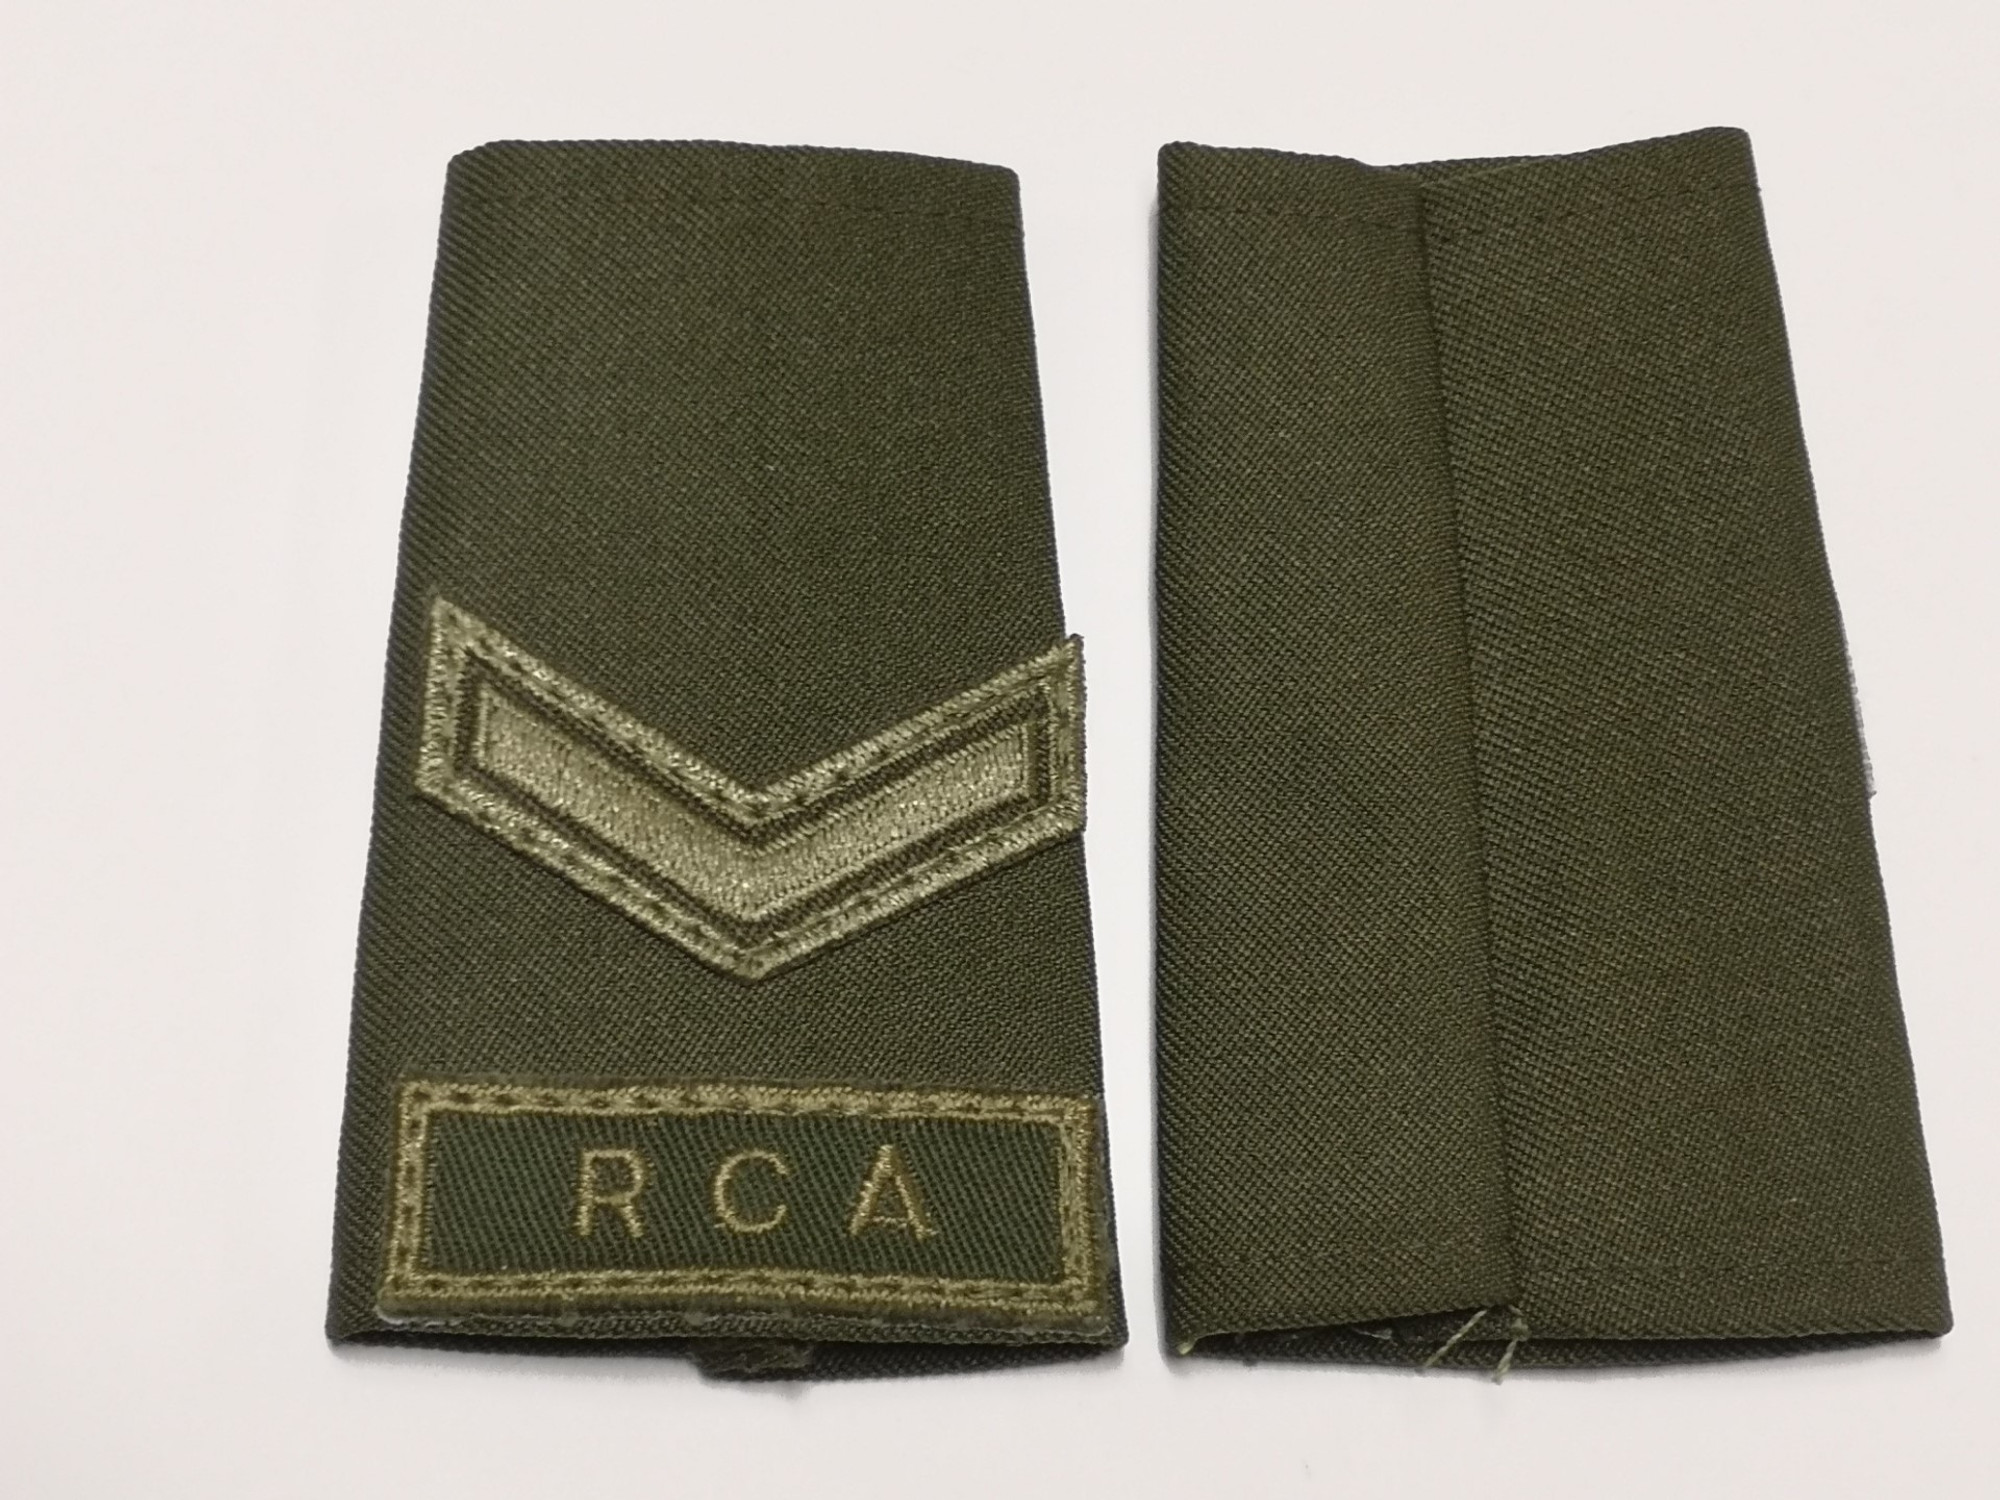 Canadian Armed Forces Green Rank Epaulets RCA - Private (Trained)